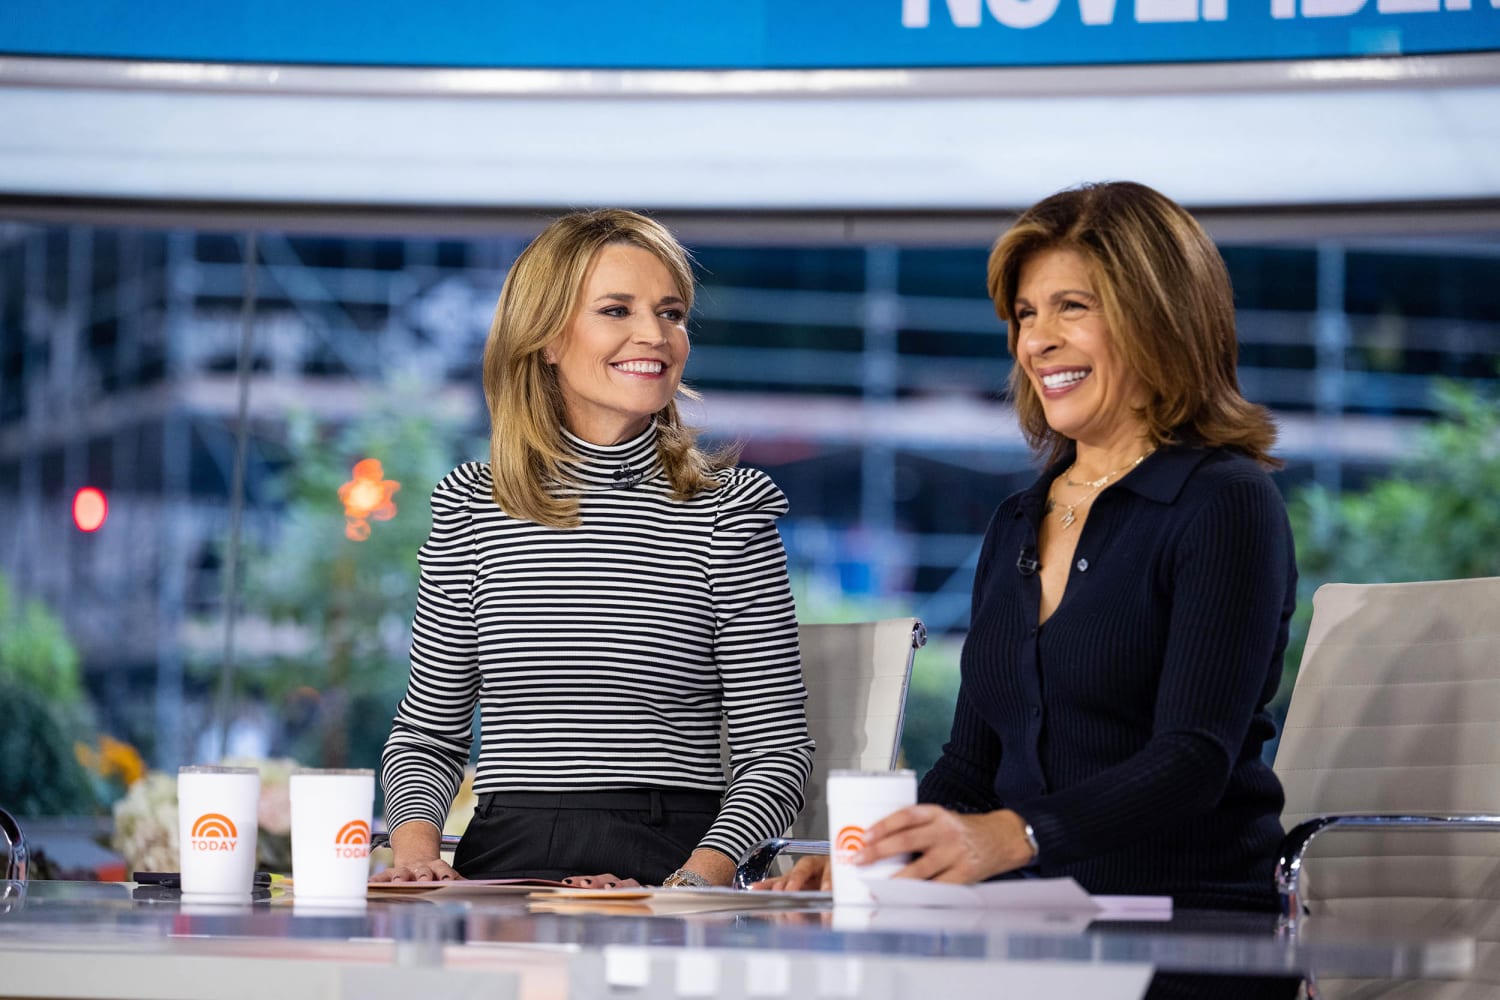 Hoda Kotb says Savannah Guthrie’s new book helped her navigate a ‘difficult’ parenting moment